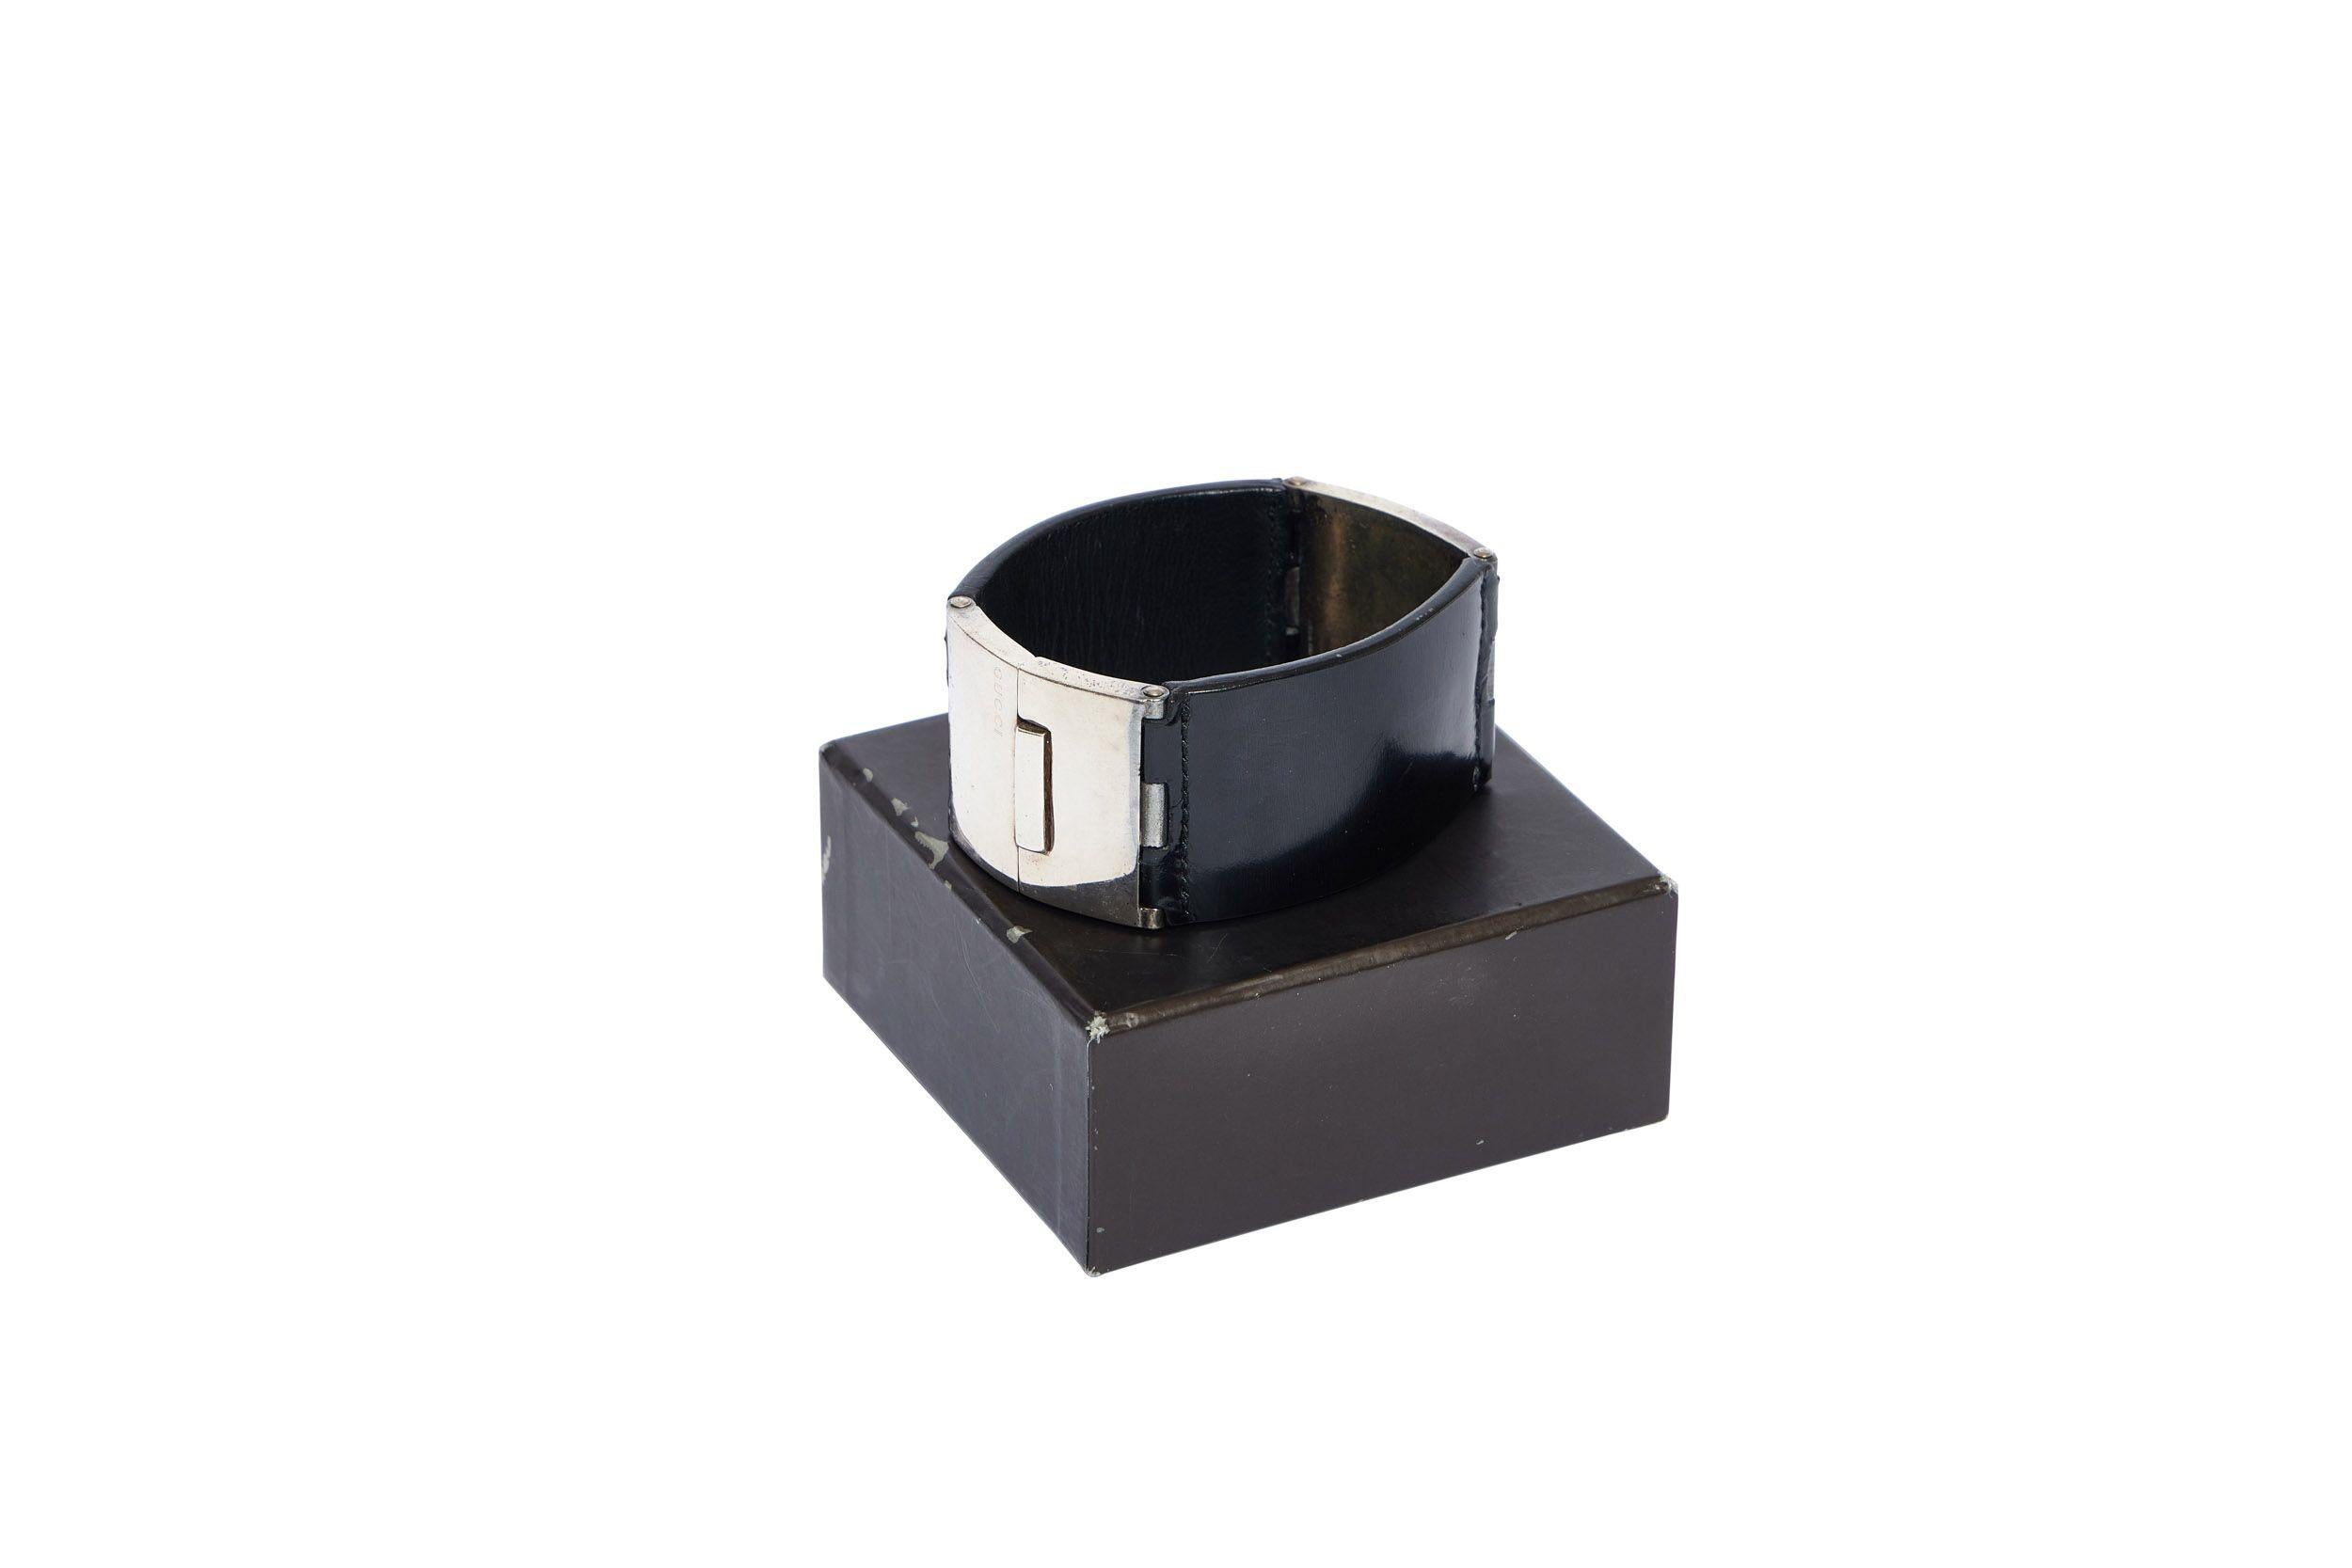 Gucci bracelet crafted of black leather and silver metal clasp to close. The piece is new and comes with a box, booklet and ribbon.